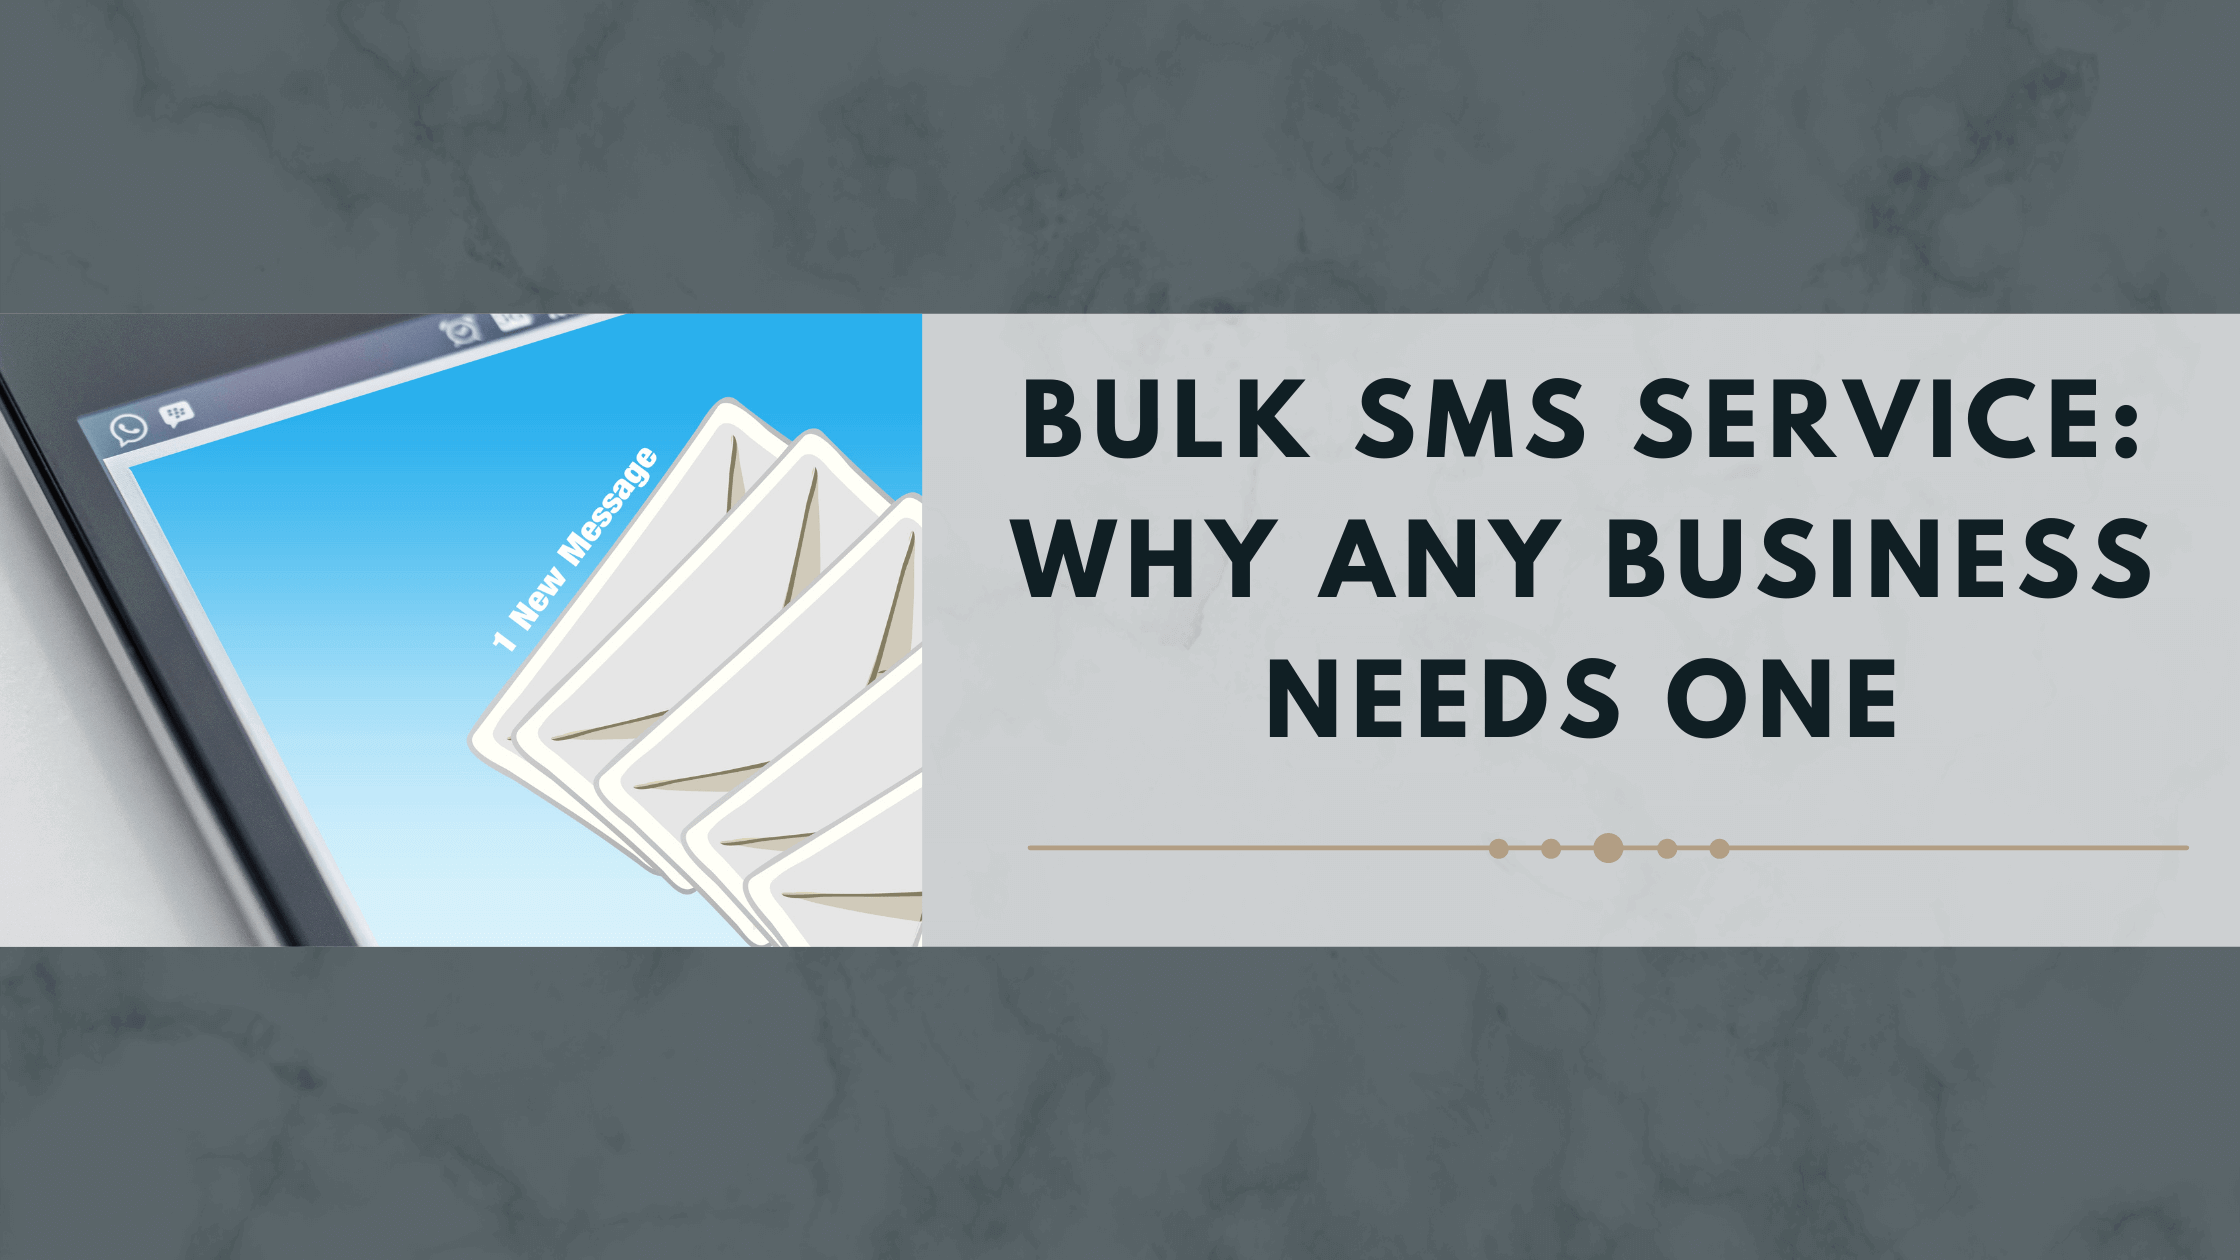 Bulk SMS Service - Reasons Why Any Business Needs One